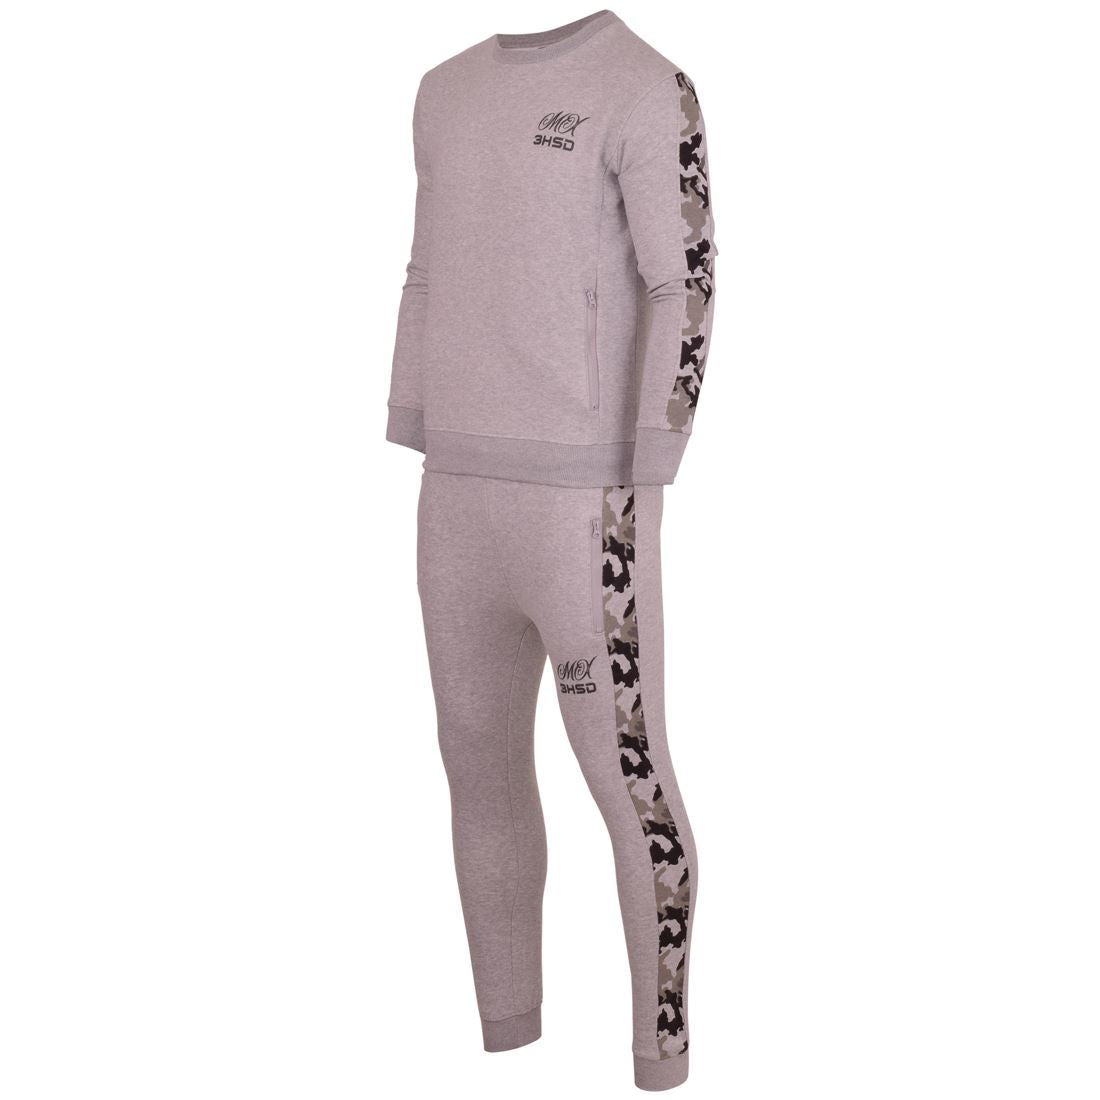 Mens MX360 Full Tracksuit Set Top + Bottoms, Camo Round Neck Top, Jogging Bottom- Top and Bottoms both have 2 Zip pockets